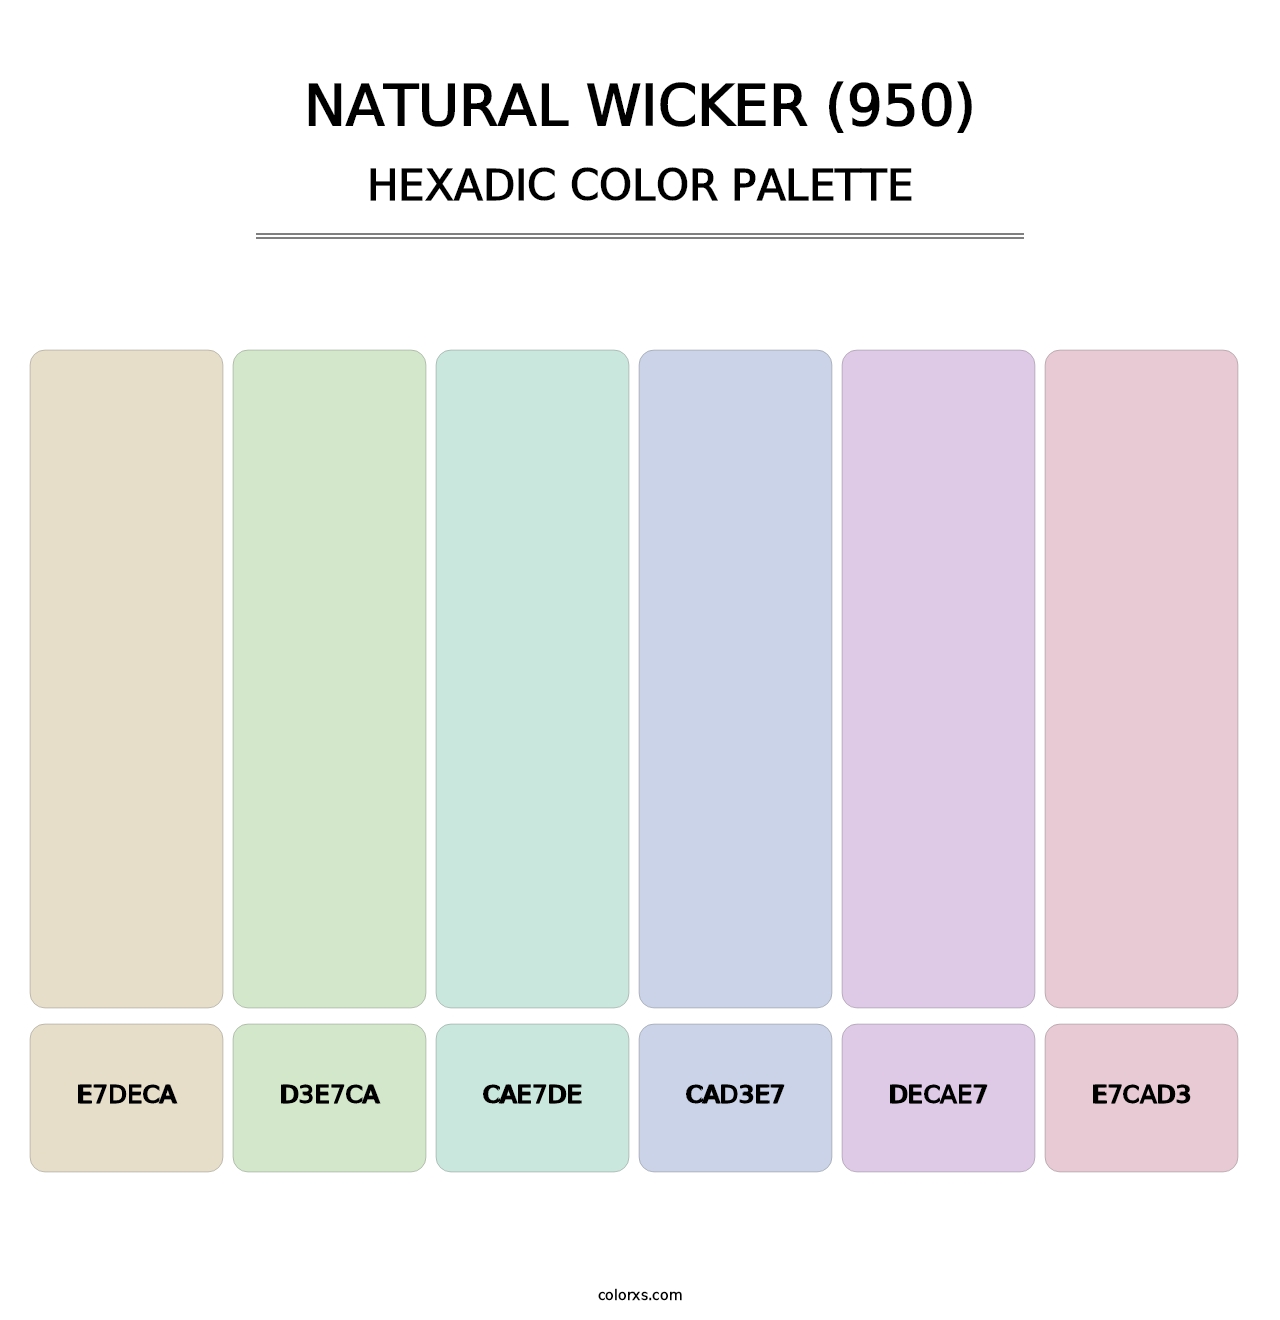 Natural Wicker (950) - Hexadic Color Palette